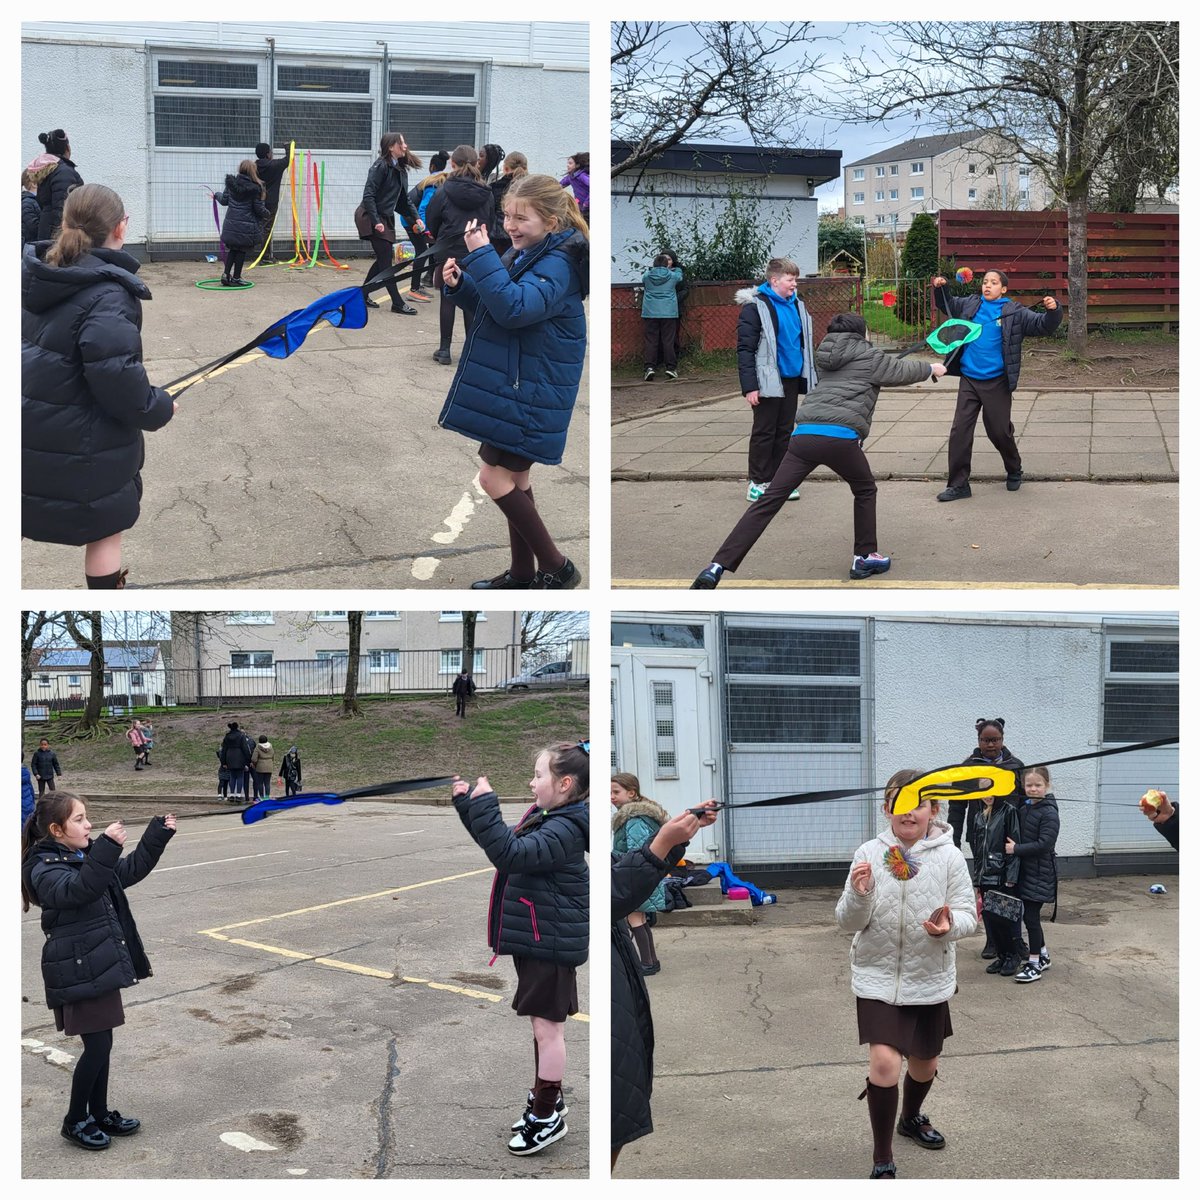 The middle/senior playground children are trying out our new tosh and catch ball game.@StBlanesGCC Fun times at lunchtime! 🙂 #Playground #heathandwellbeing #friendships